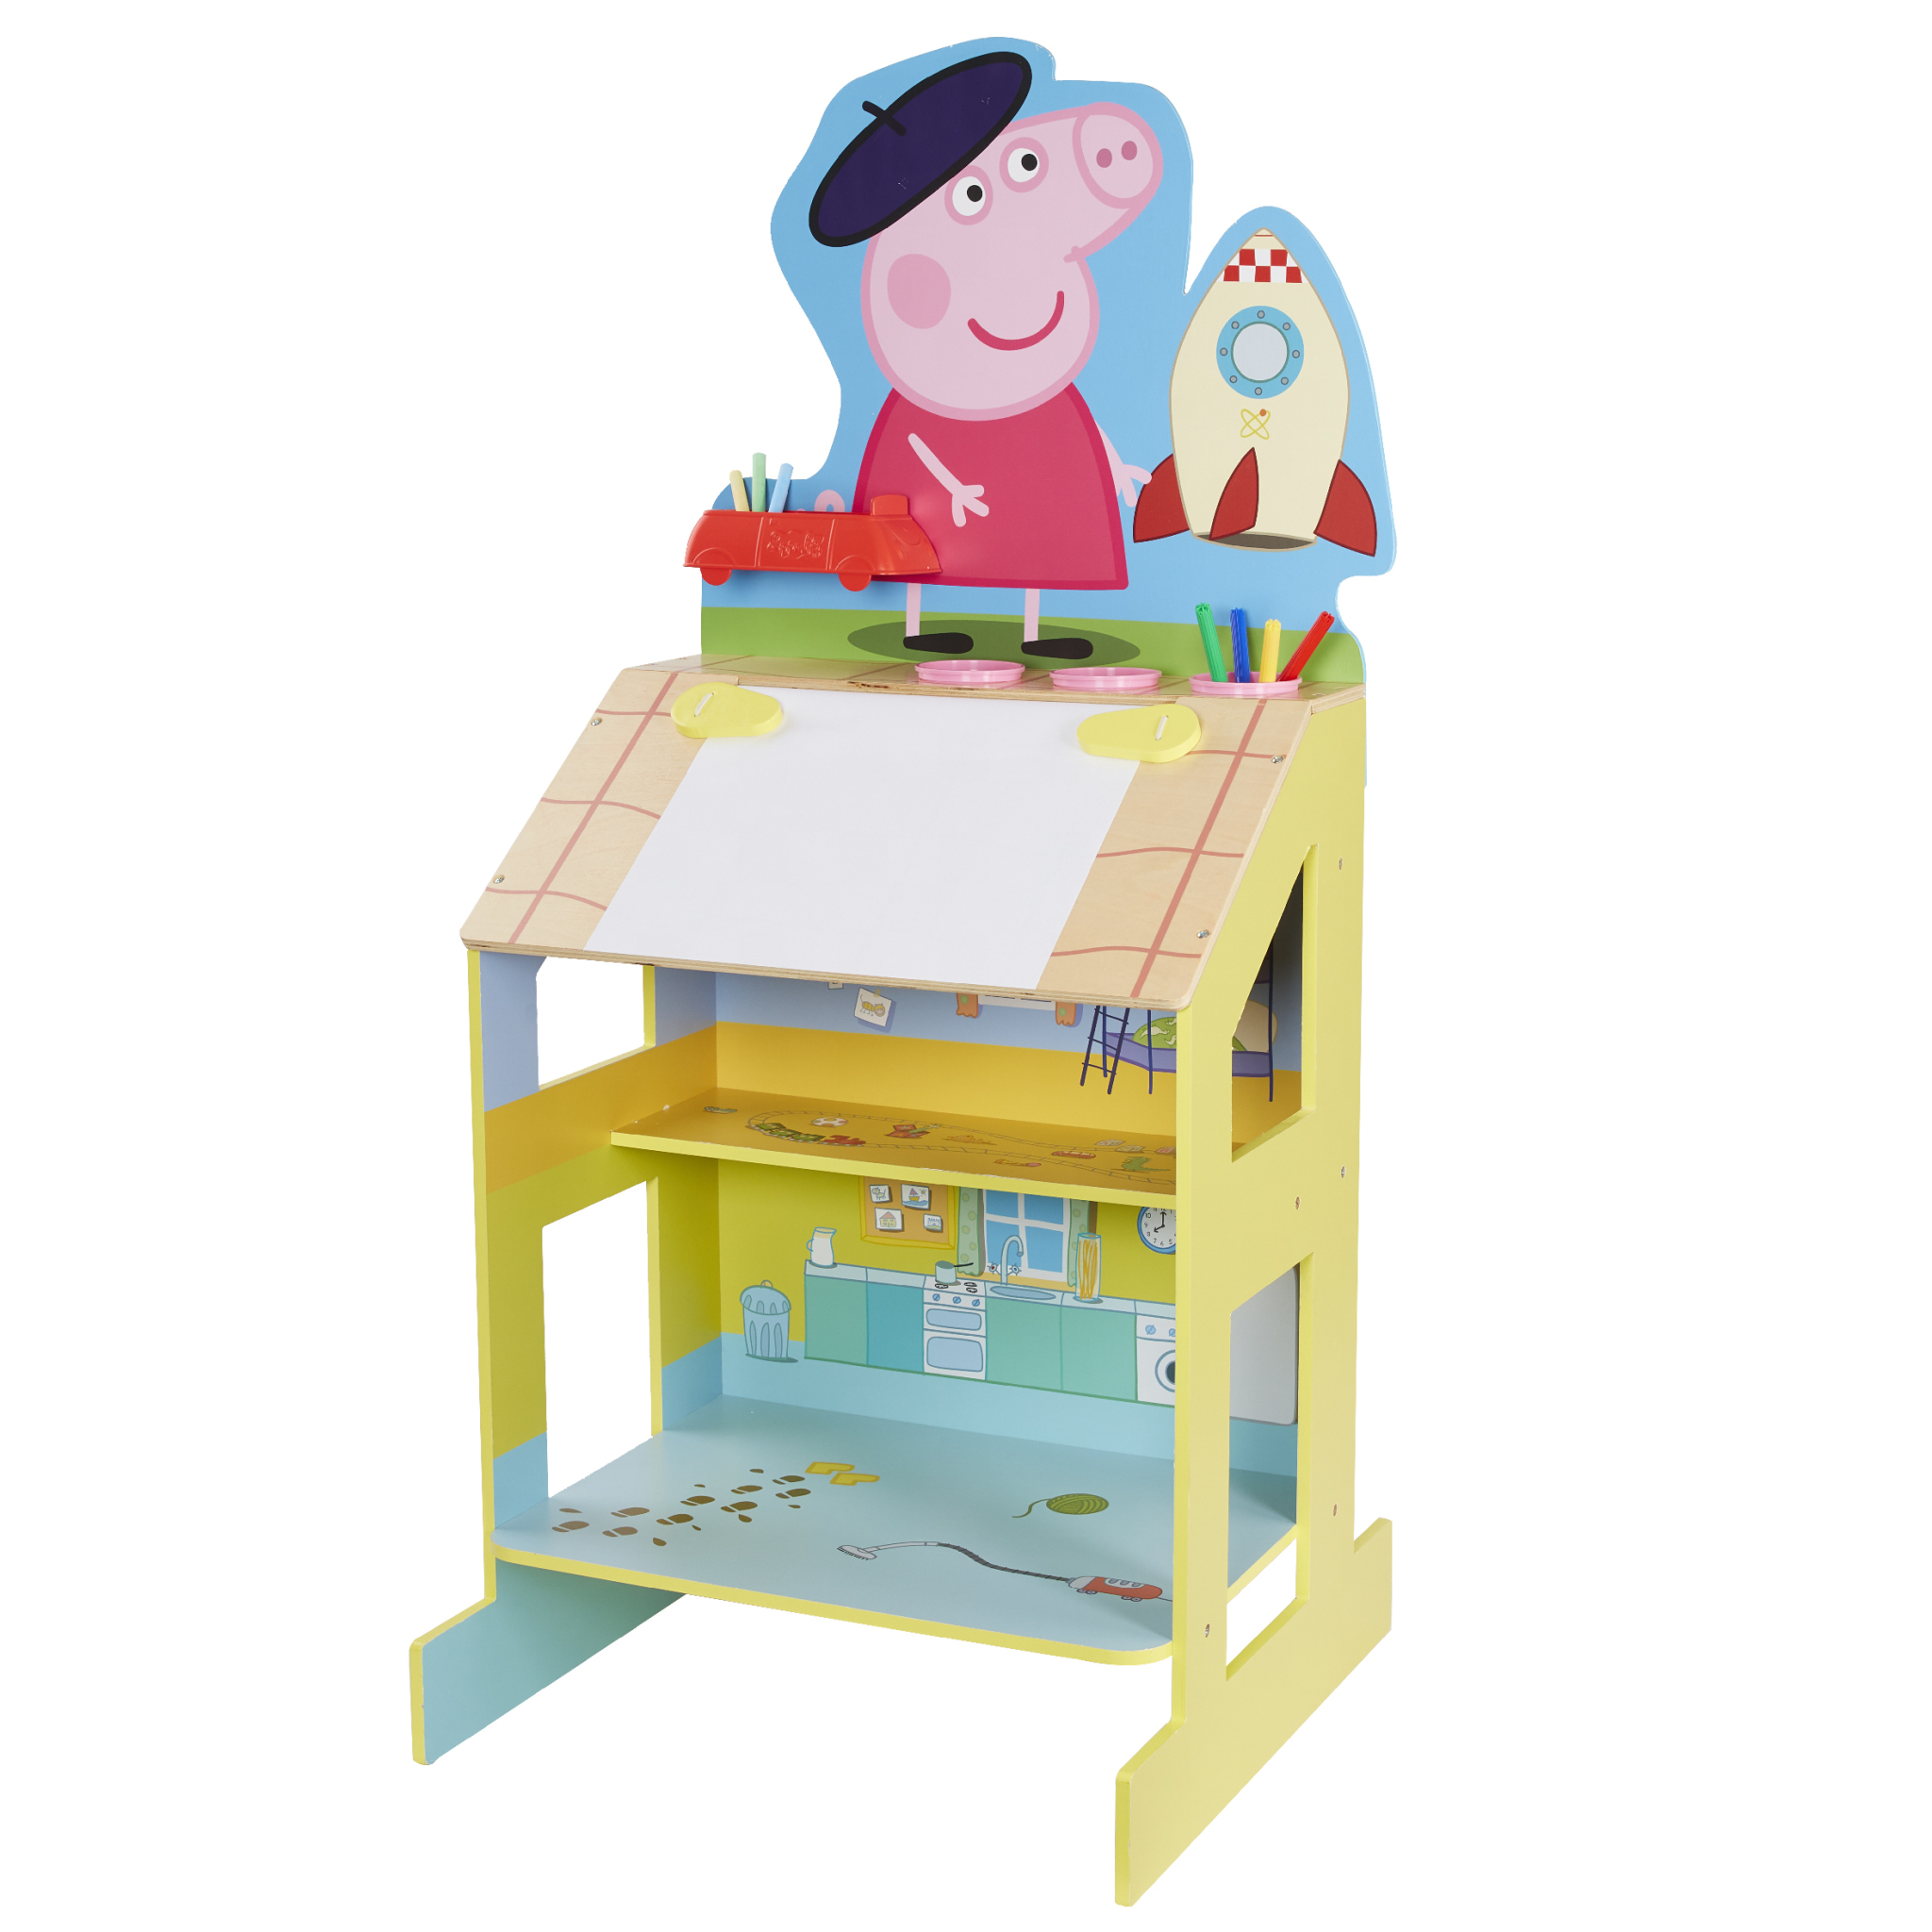 Peppa Pig - Wooden Play & Draw Easel (07430)